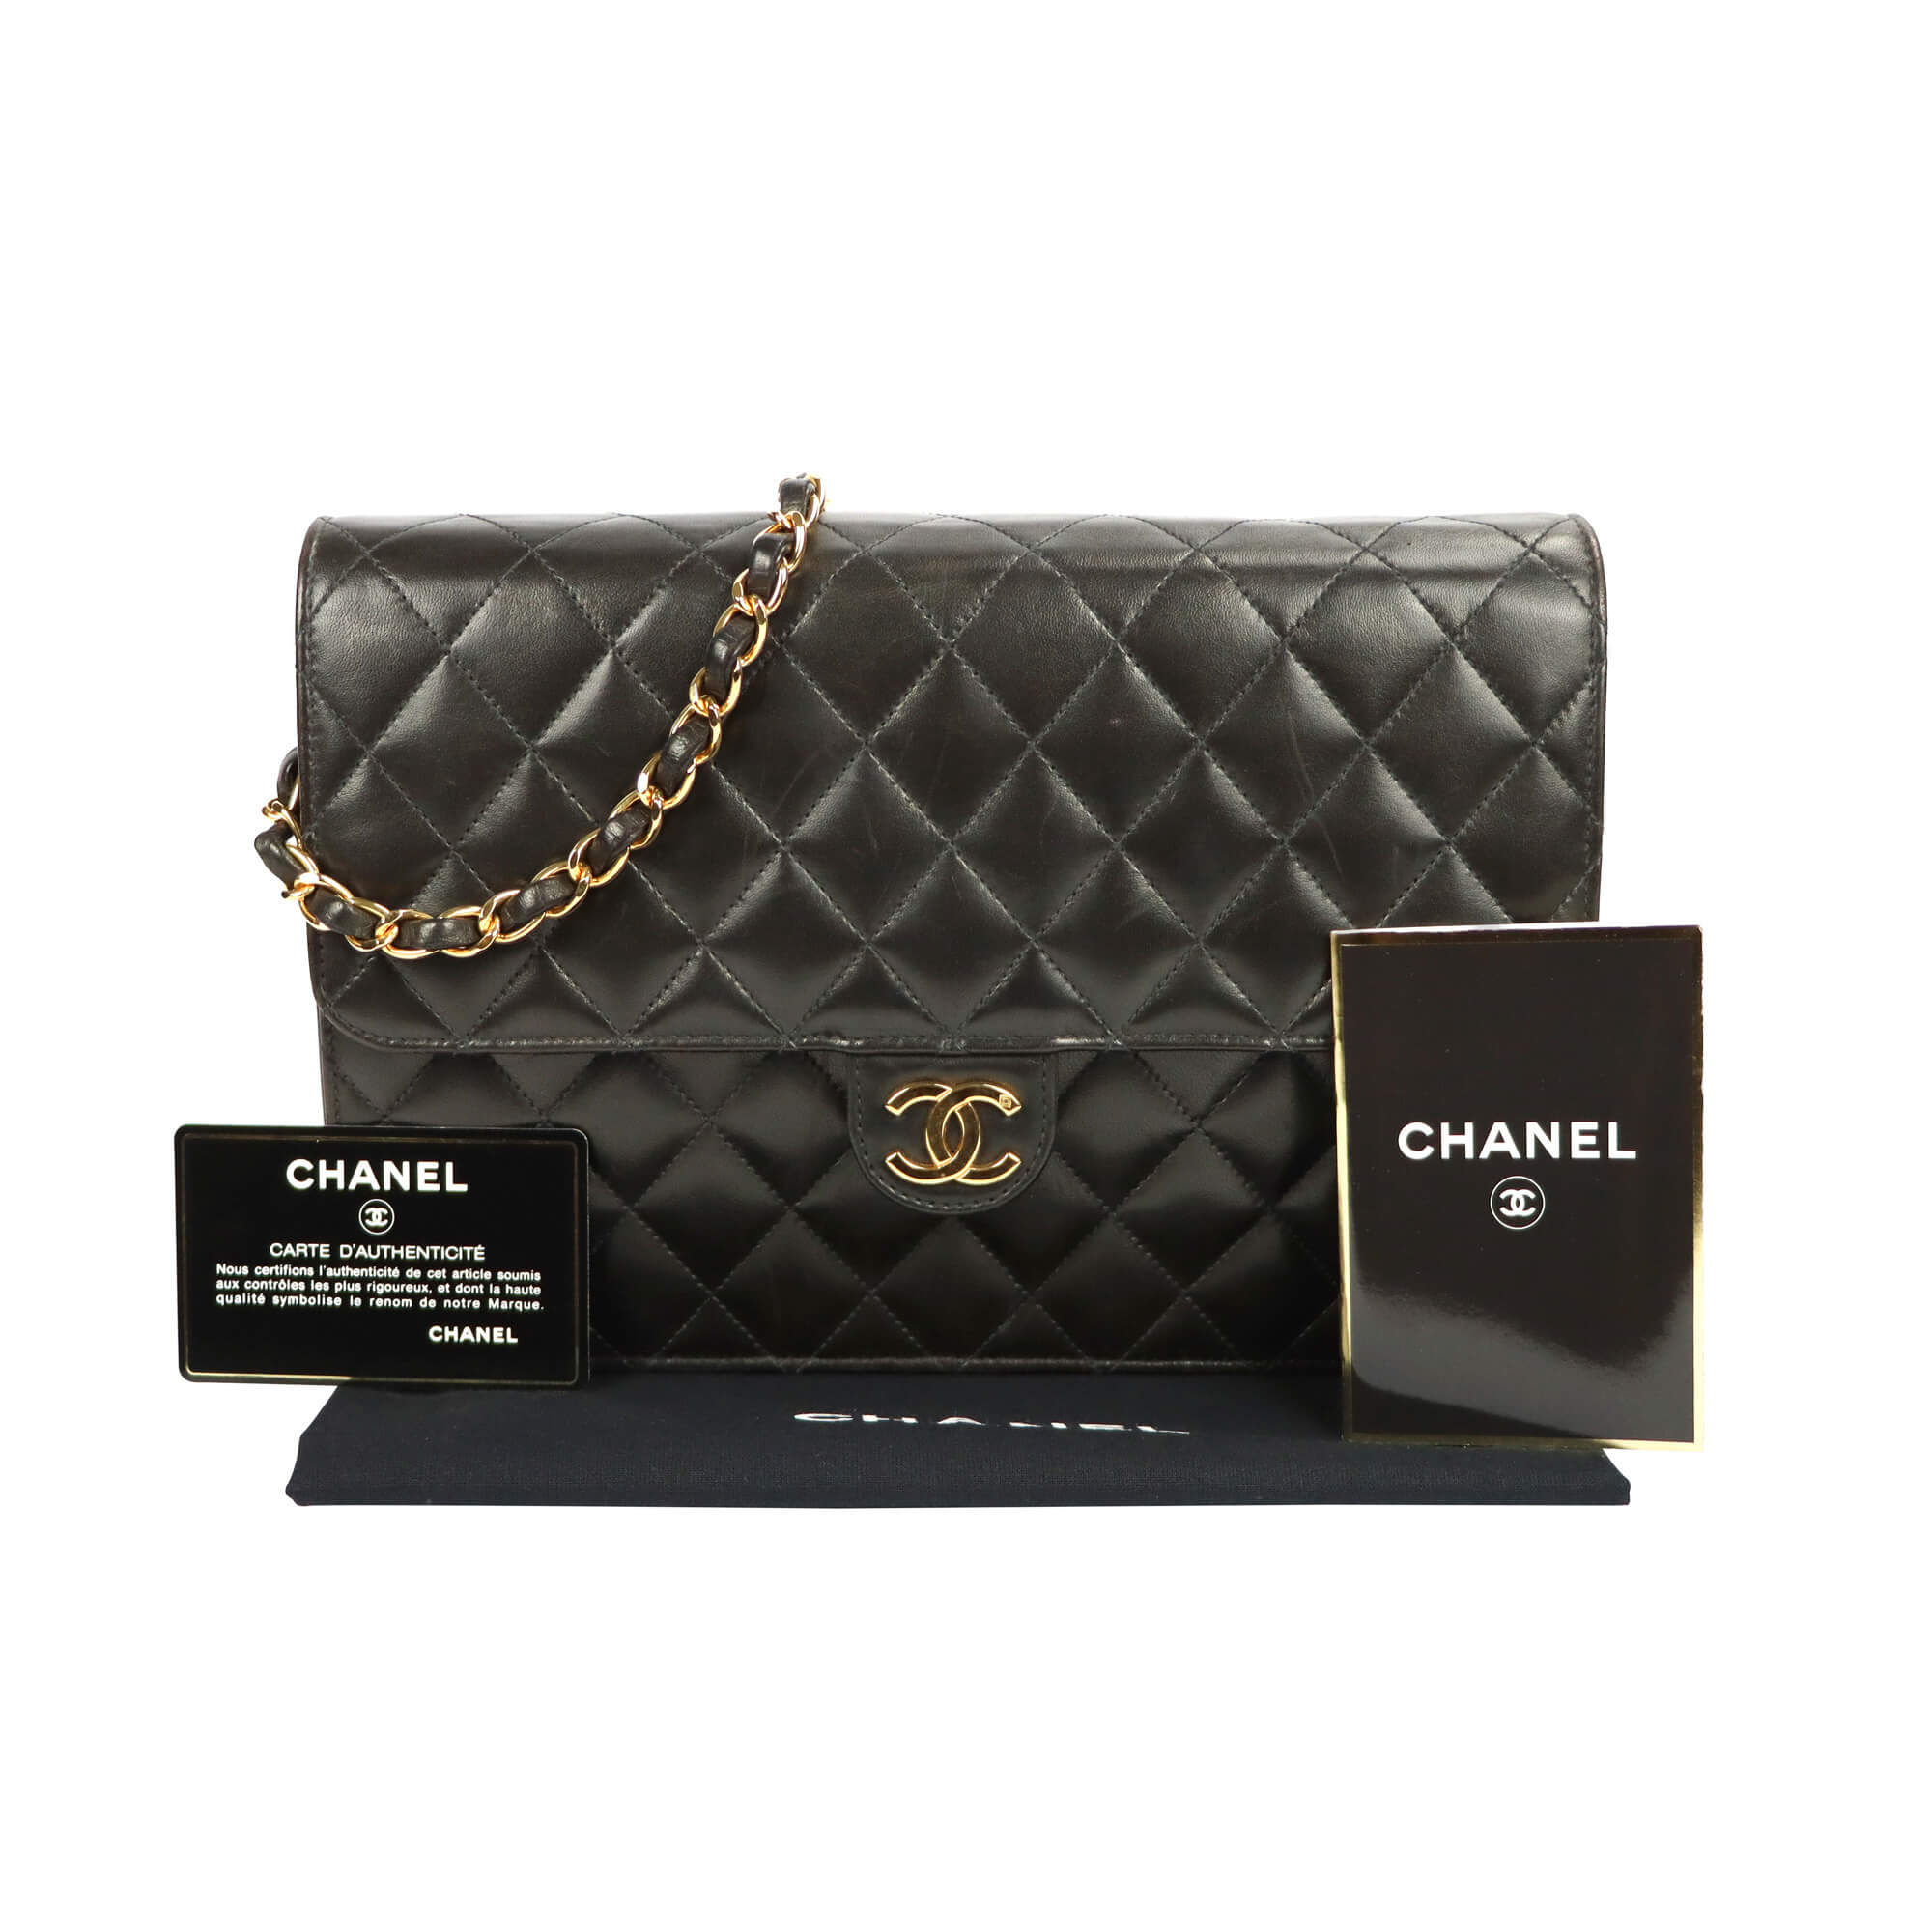 Chanel Classic 10 Medium Black Lambskin 255 Flap Bag with Gold Hardware   SOLD